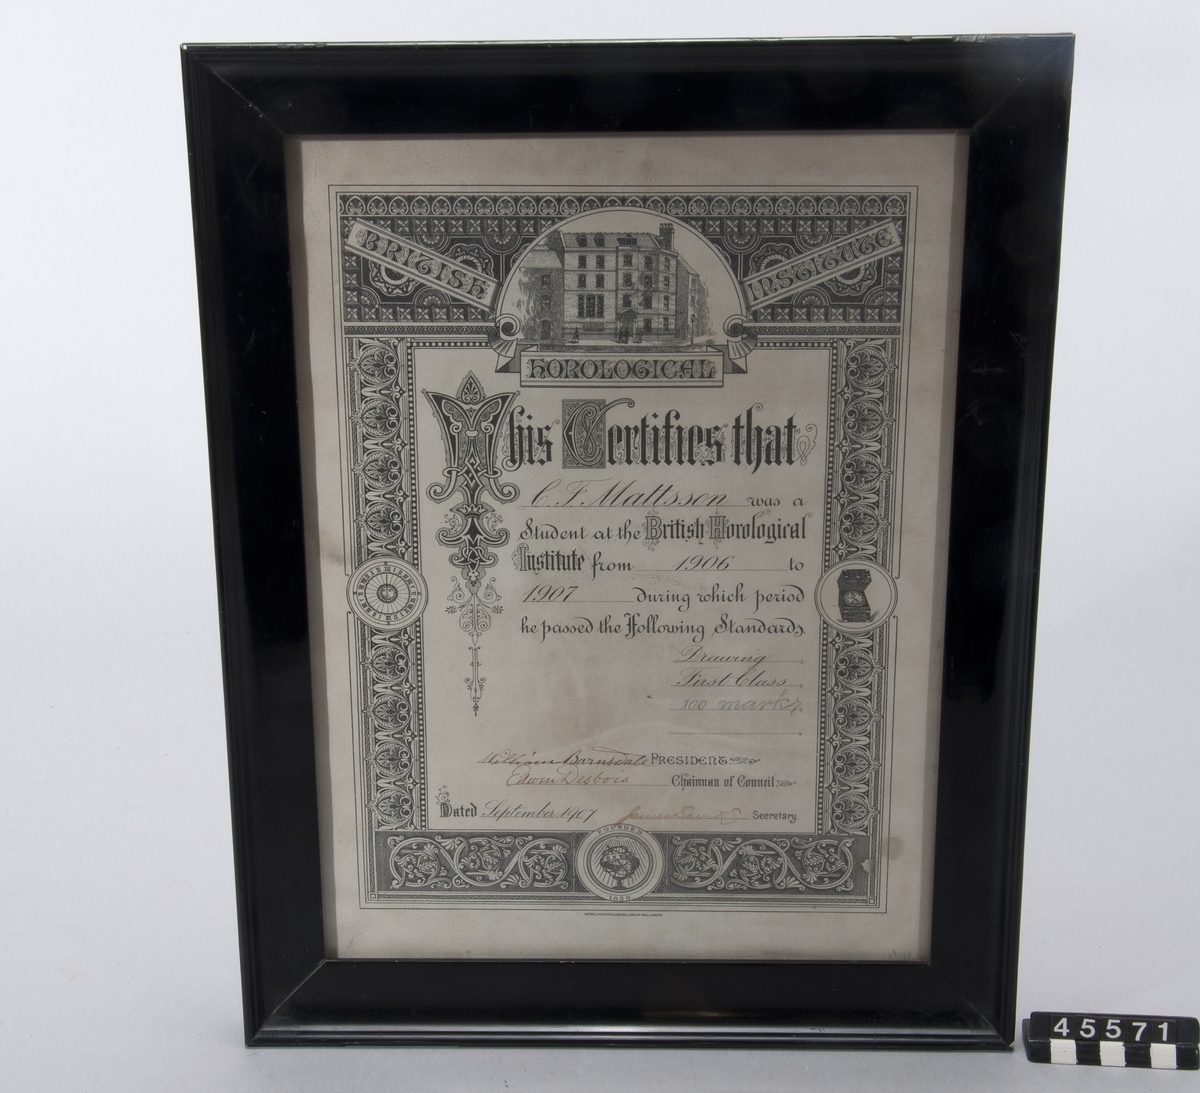 Tavla, certifikat med texten: "This certifies that C.F.Mattsson was a Student at the British Horological Institute from 1906 to 1907 during which period he passed the Following Standards...".